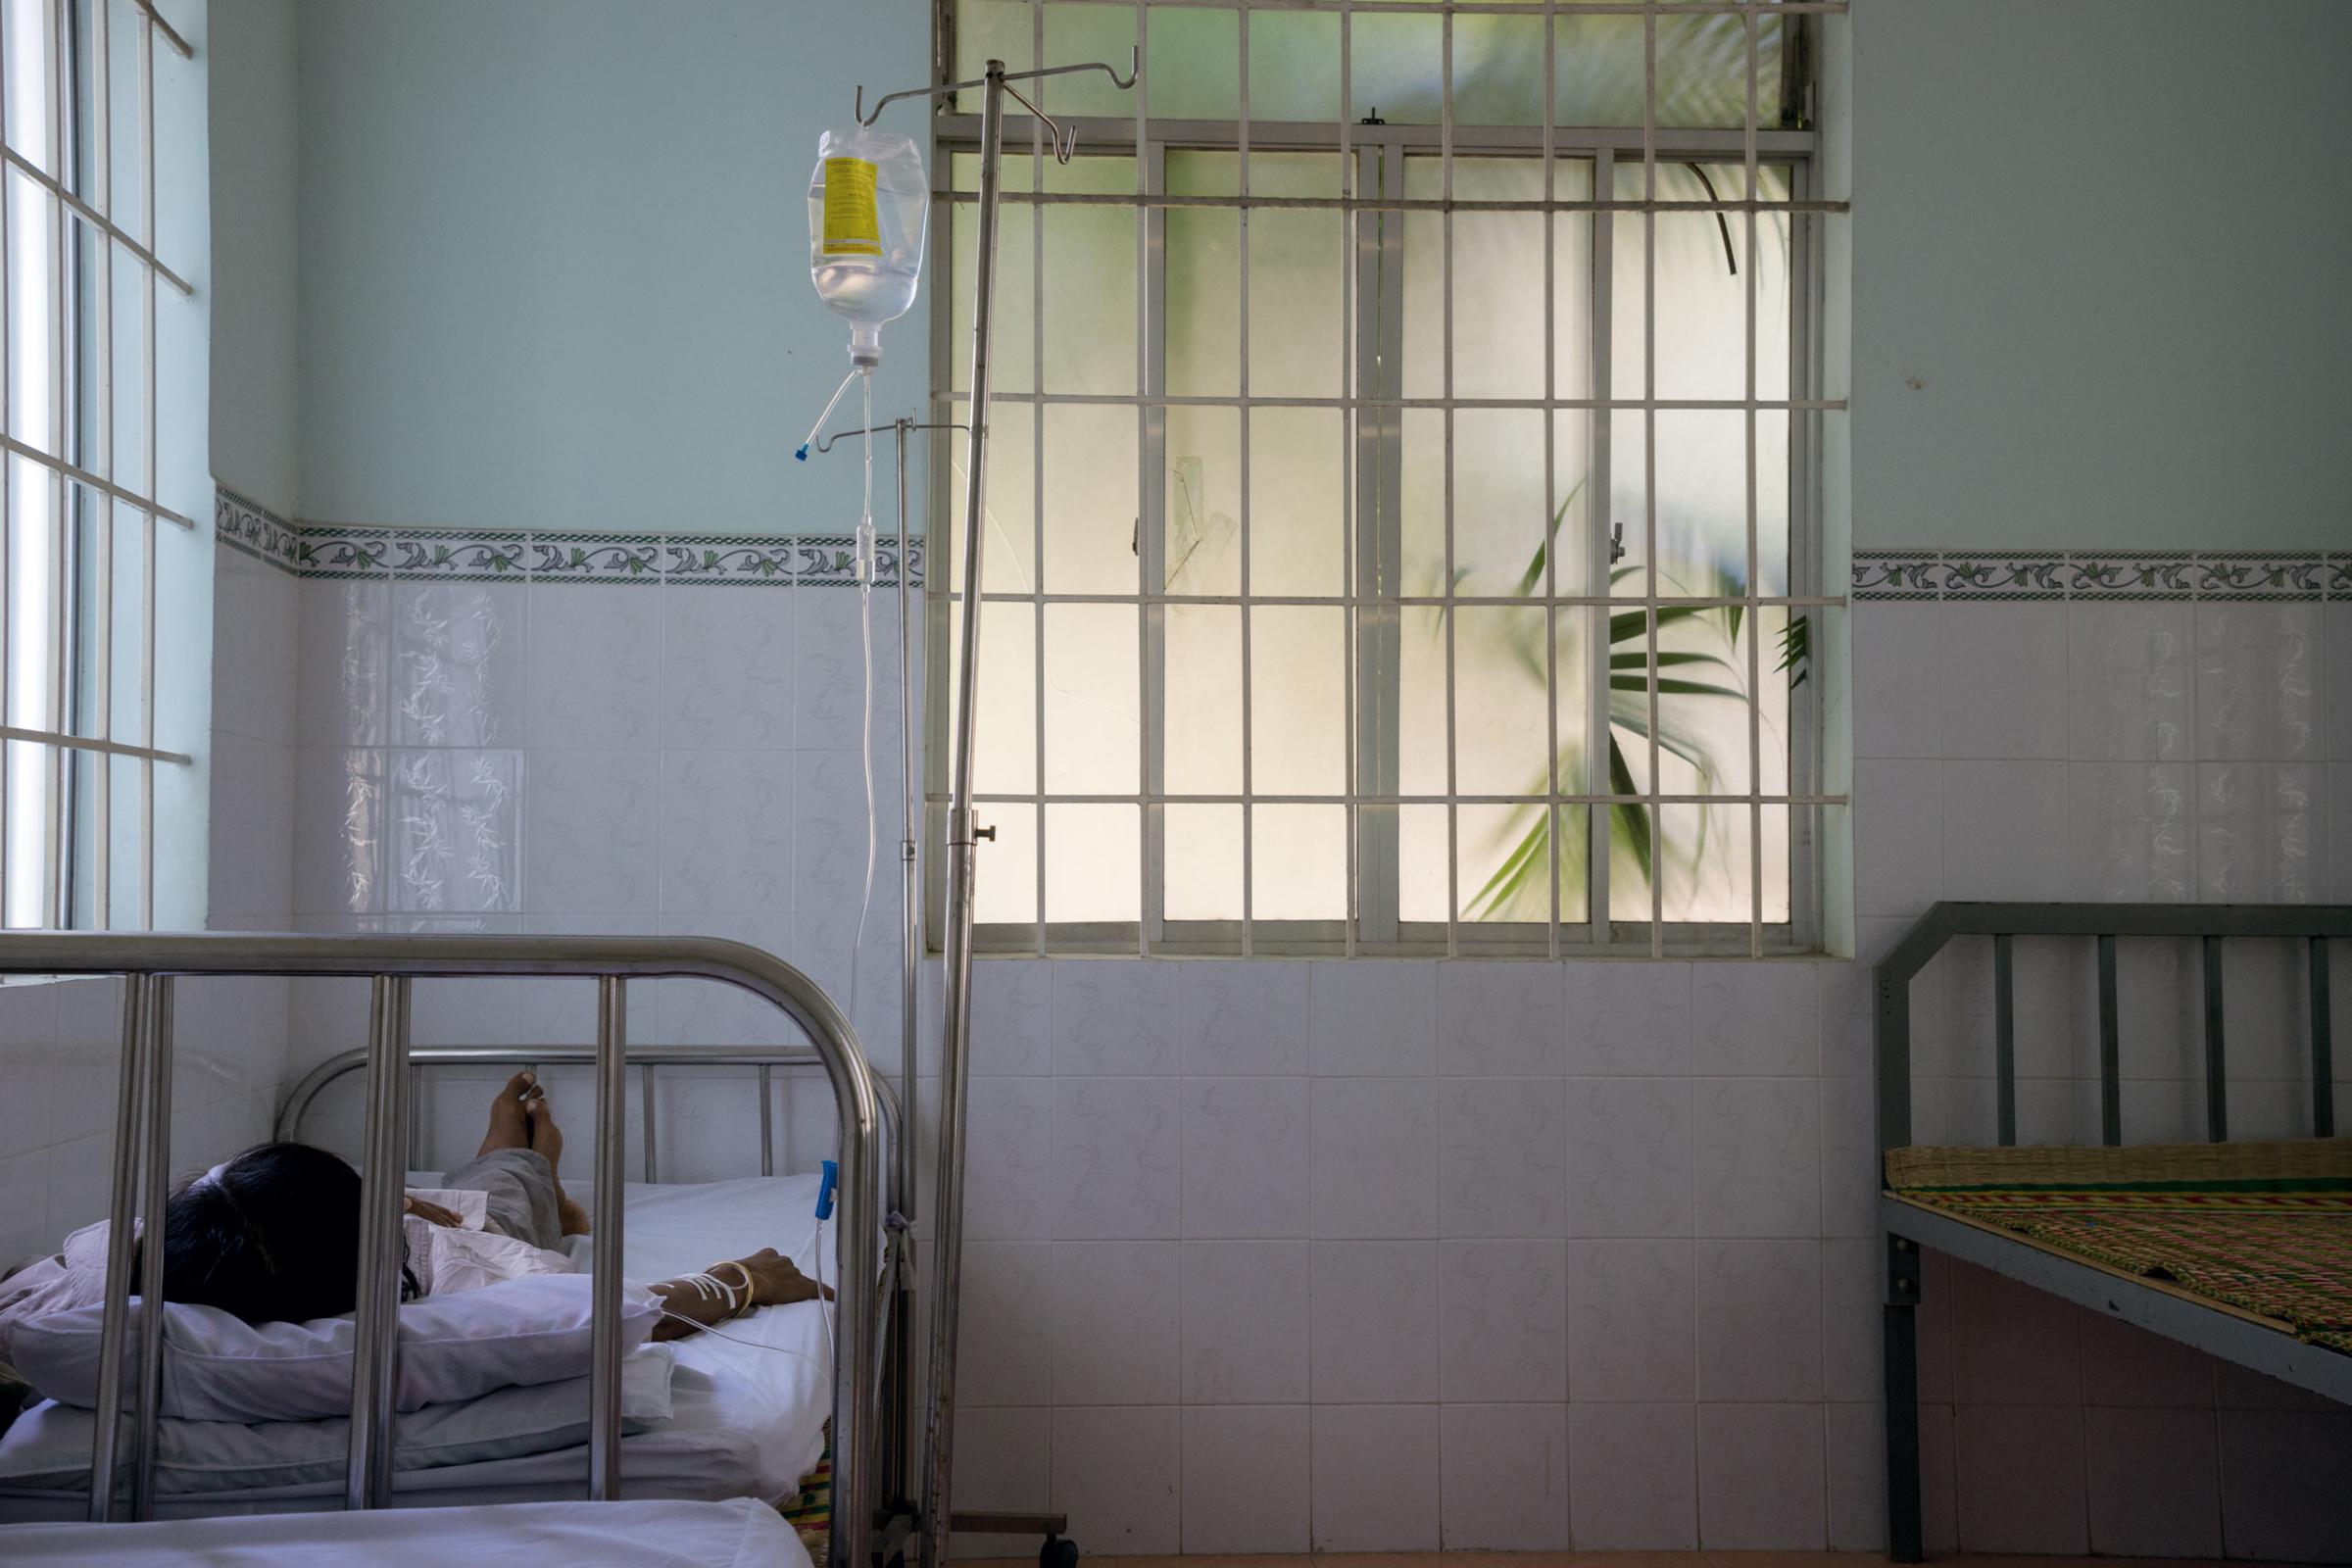 A patient receives an intravenous solution at a commune health center in Khanh Hoa Province. Atlantic has constructed, rebuilt or provided medical equipment and supplies to 68 CHCs in Khanh Hoa province alone.